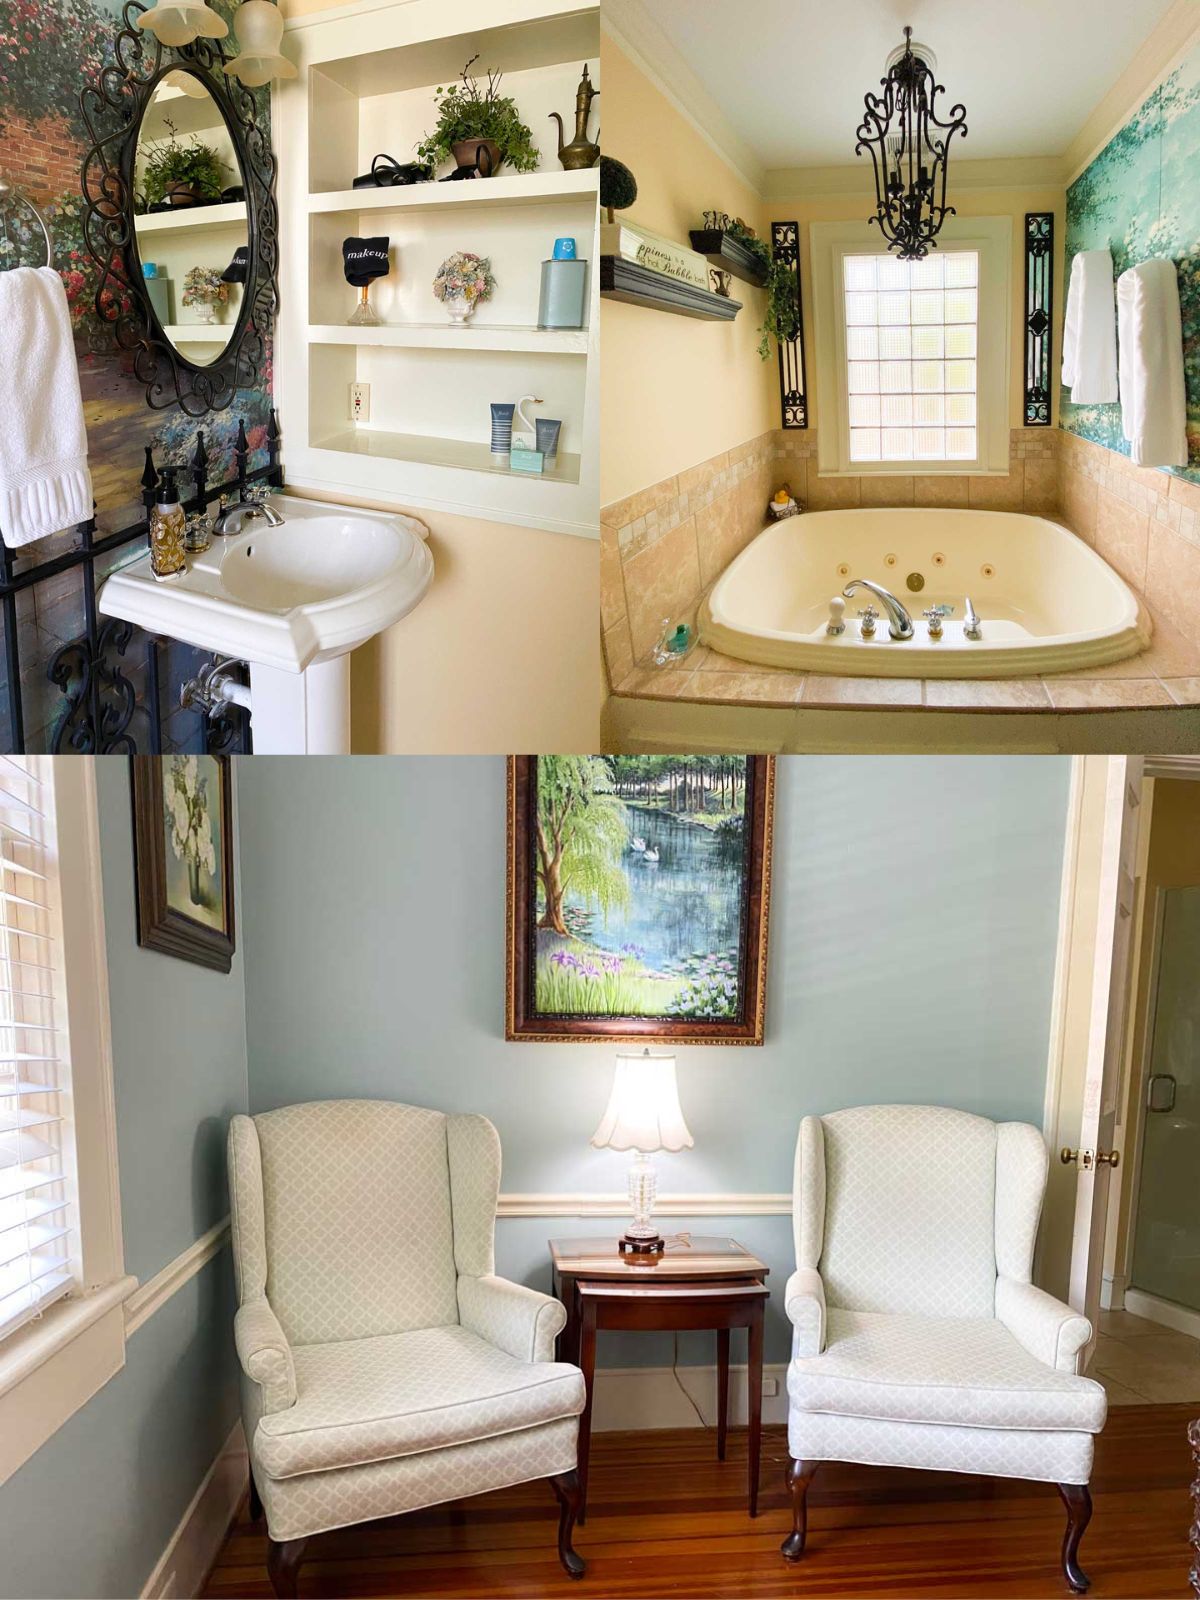 The bathroom and sitting area in the Swan Room.